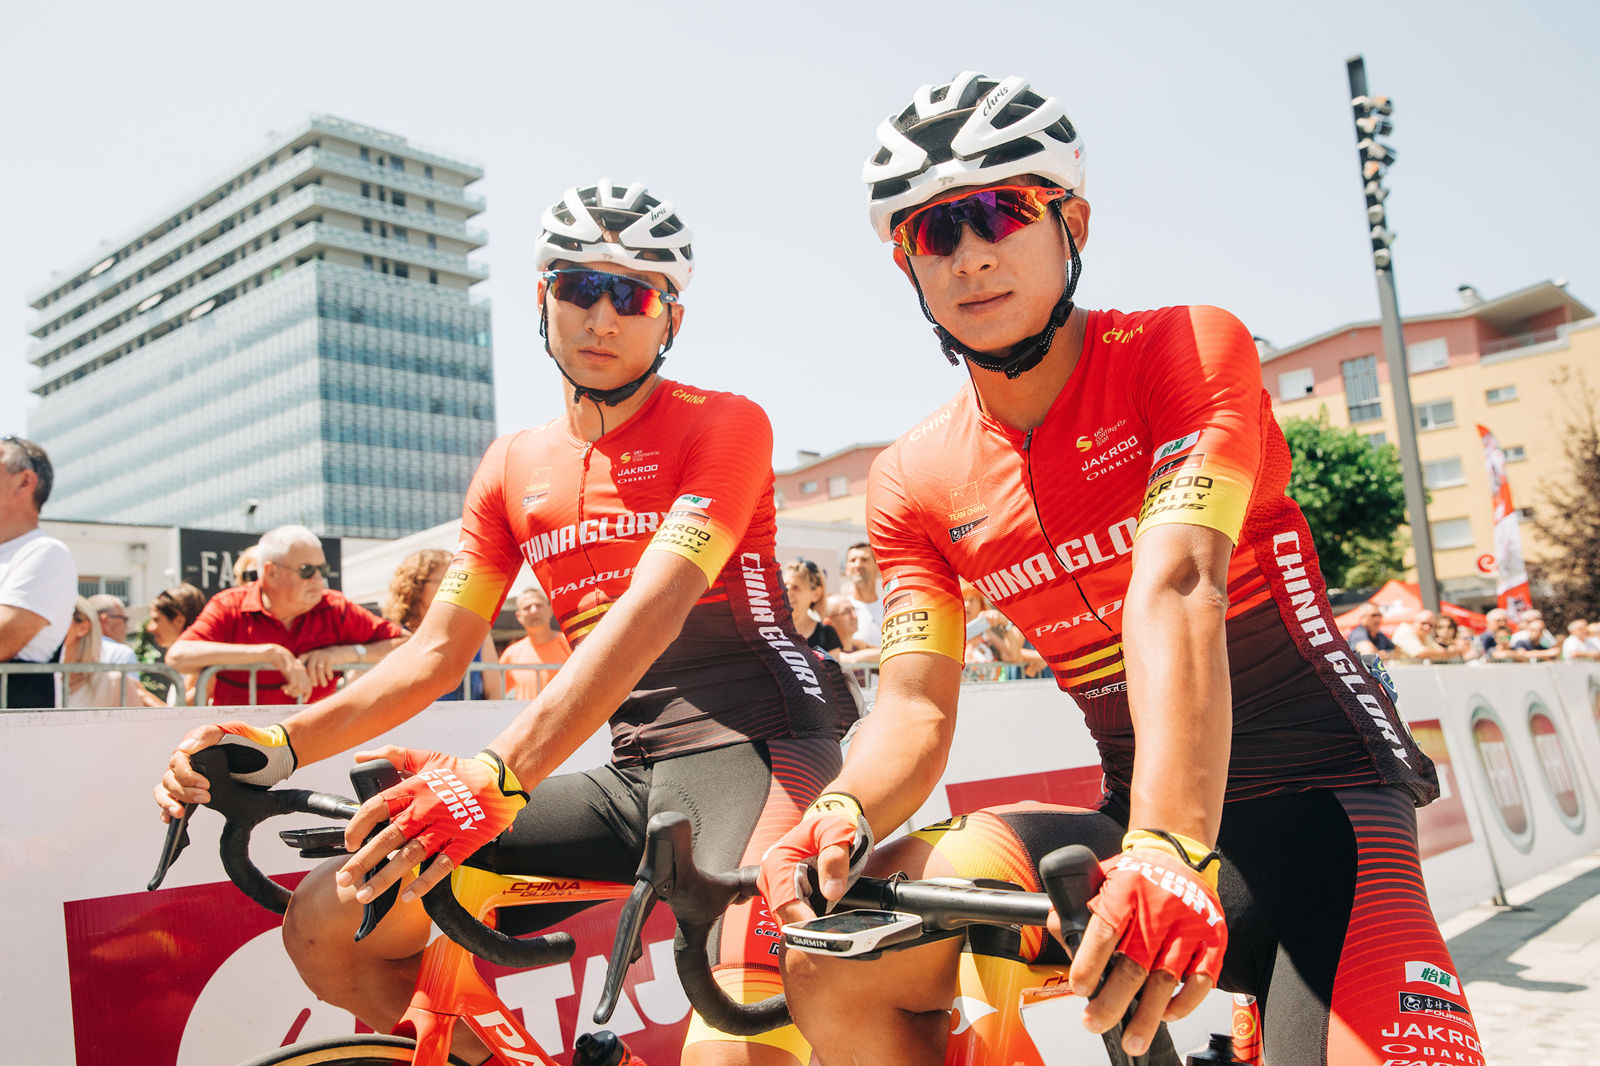 We are proud to support China's best riders competing in Europe for the China Glory Cycling team